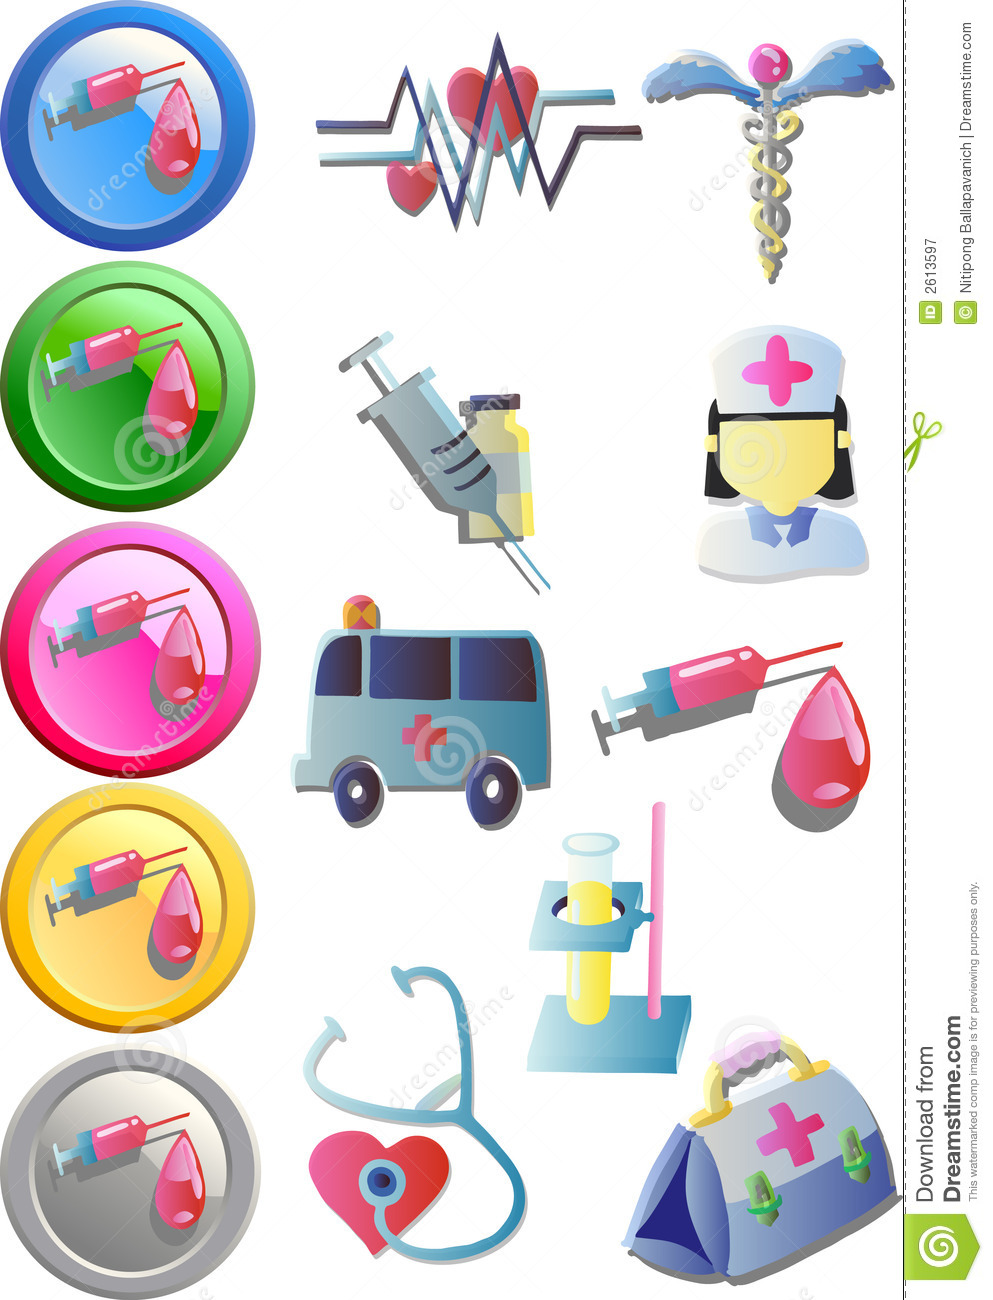 Medical Clip Art  Vector  Royalty Free Stock Photography   Image